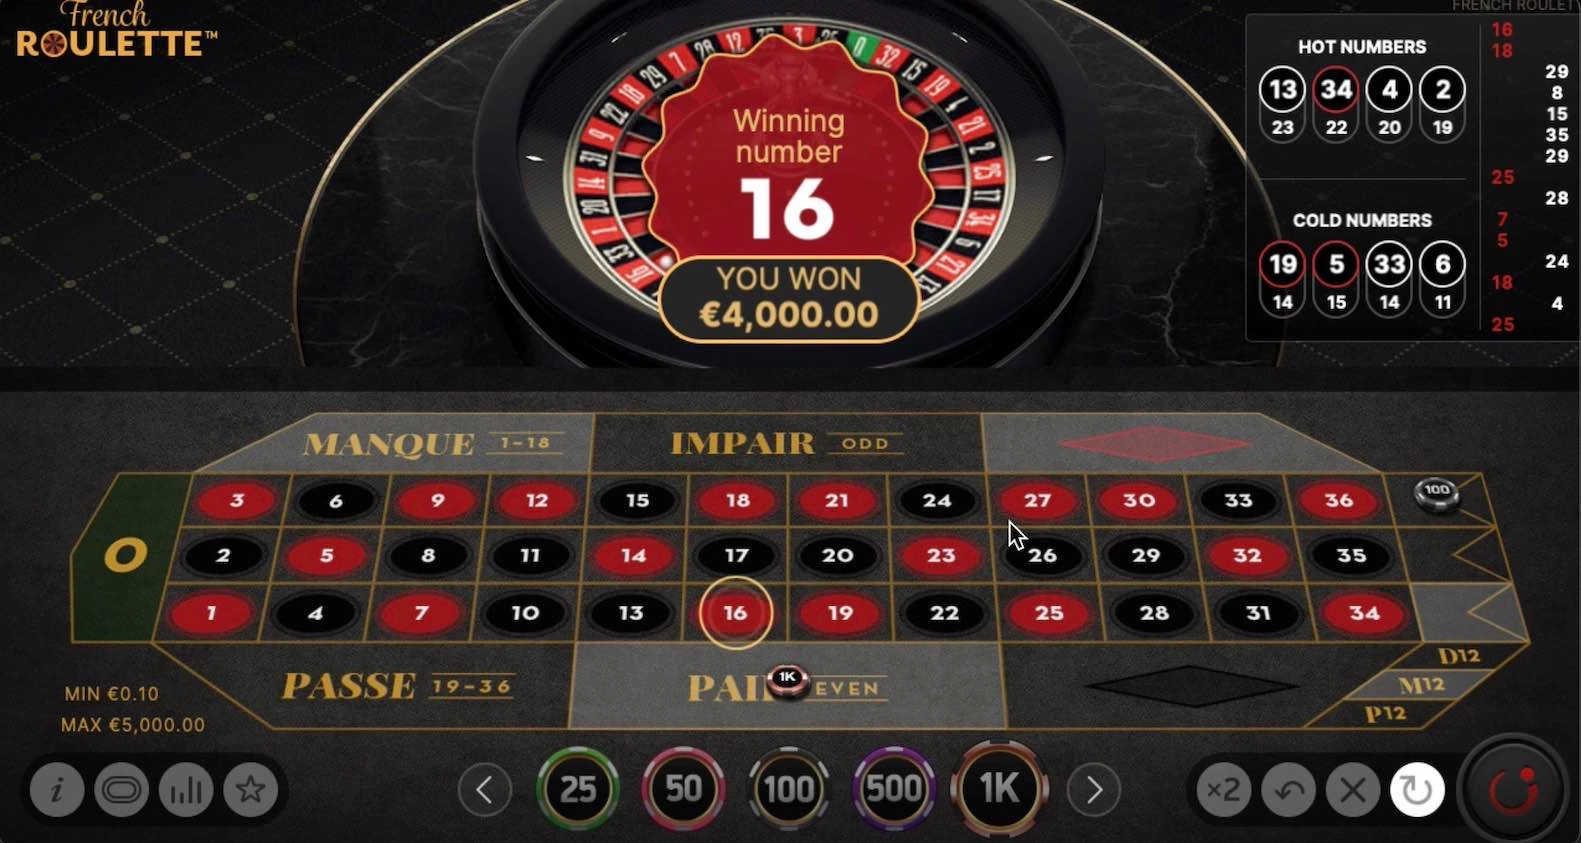 French Roulette (NetEnt) 4000$ Wins